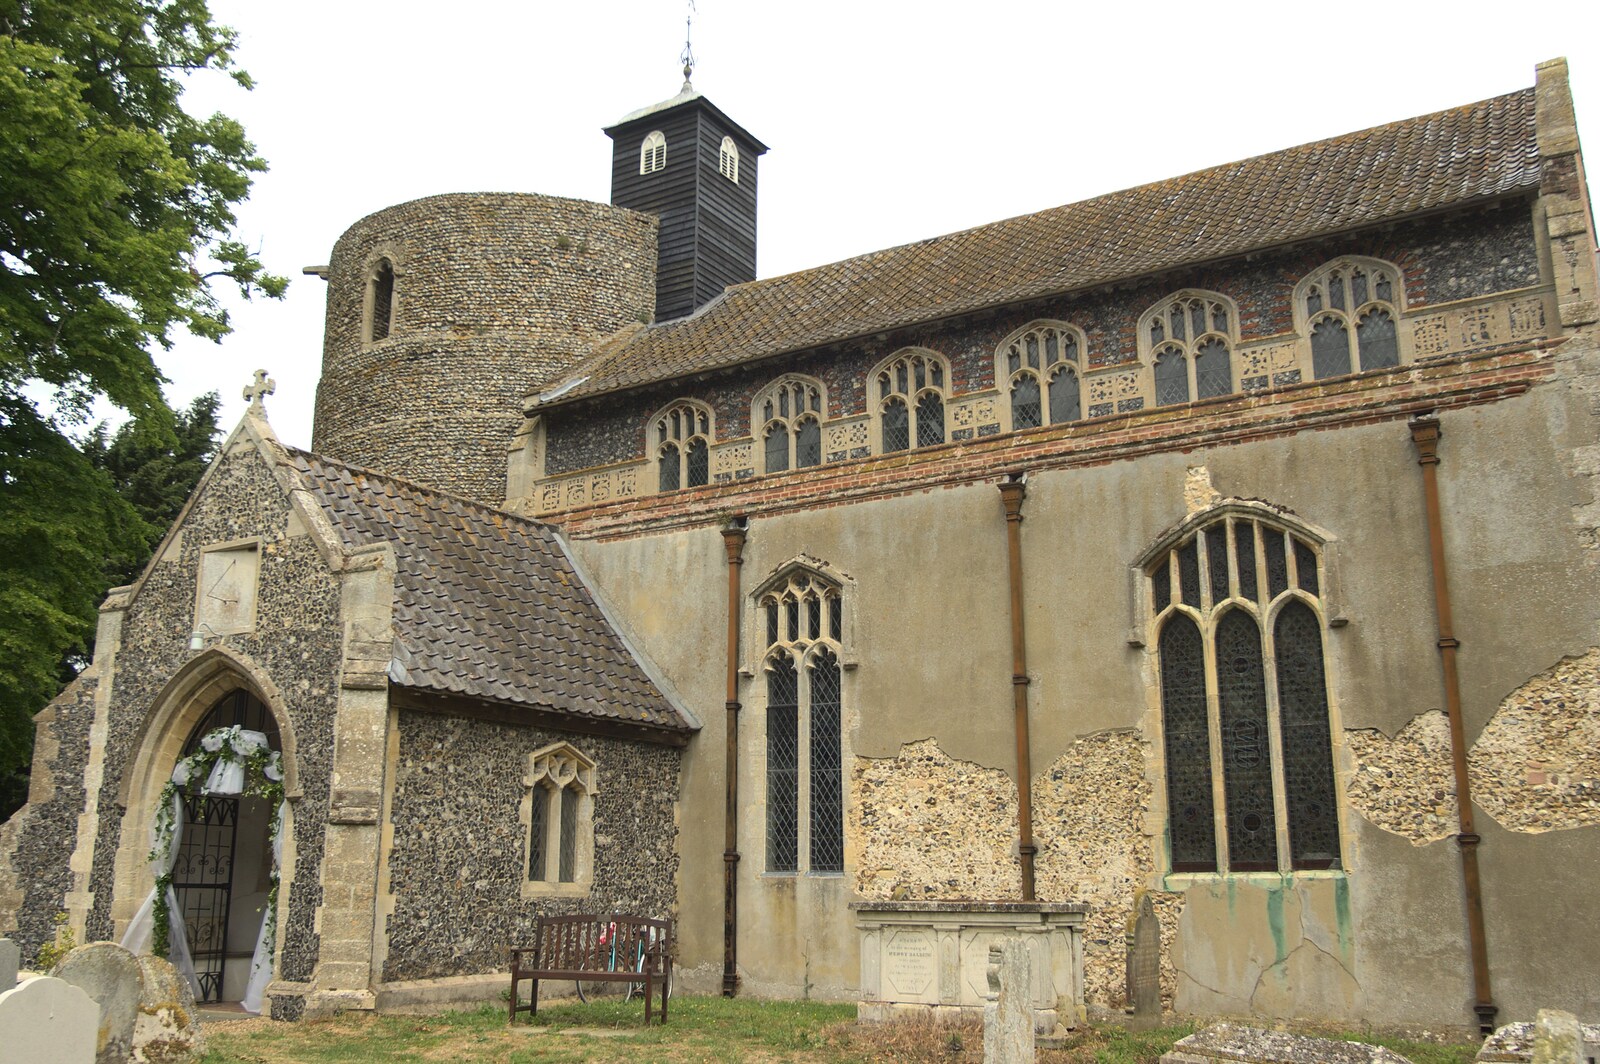 A wooden belfry has been added from A Christening at St. Mary's Church, Wortham, Suffolk - 12th June 2011